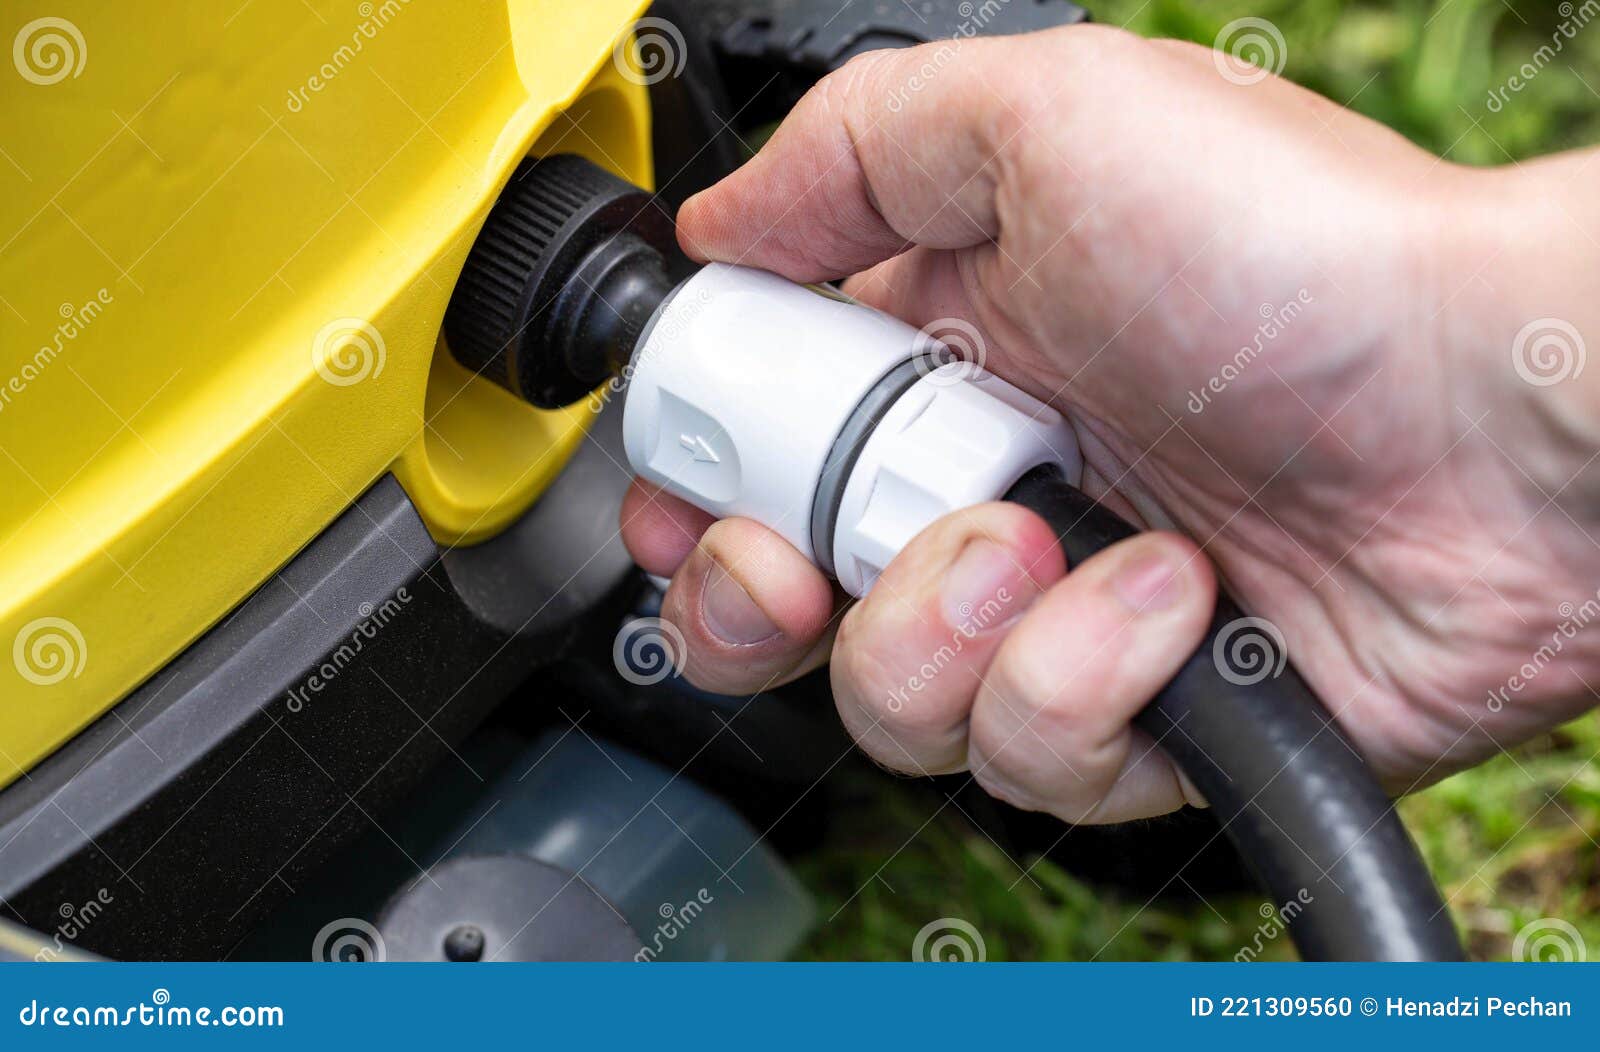 Male hand puts the quick-release hose coupling for water on the pressure washer, close-up. Industrial